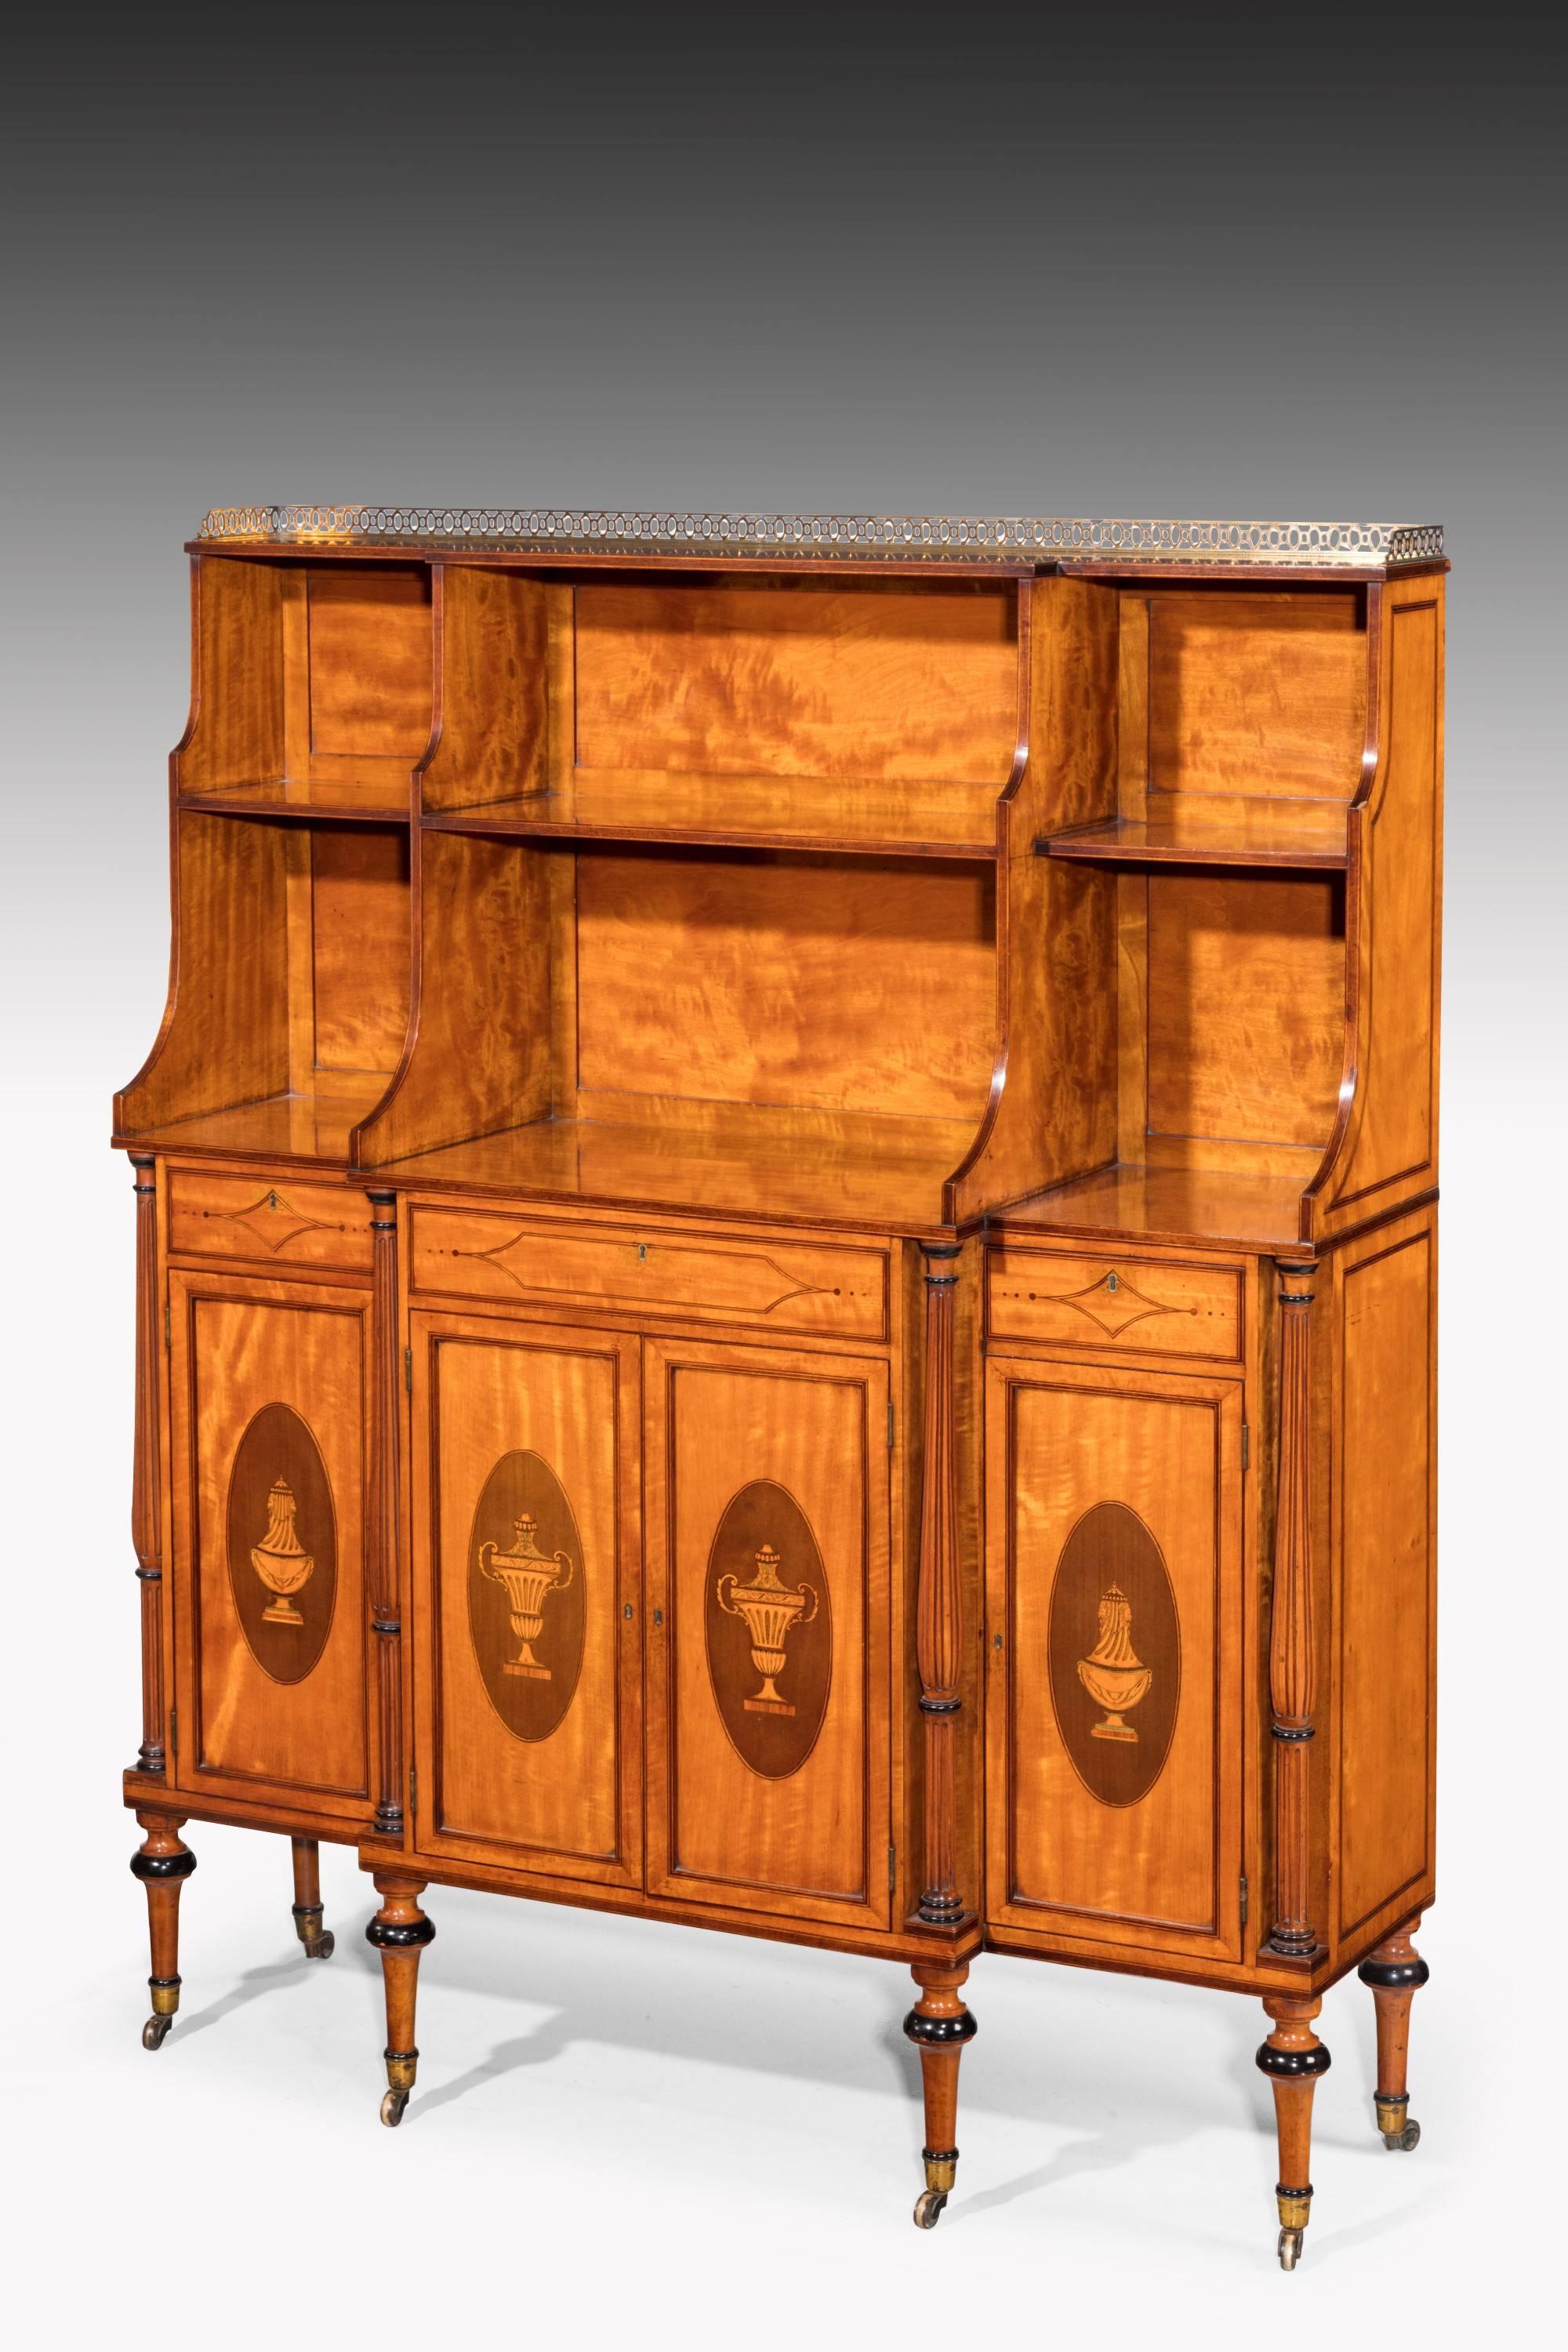 A quite exceptional pair of satinwood marquetry and parquetry breakfront dwarf cabinets. The upper sections with bookshelves surmounted by a pierced brass gallery. Oval patterns on the doors with neoclassic urns. Supported on fine turned feet with